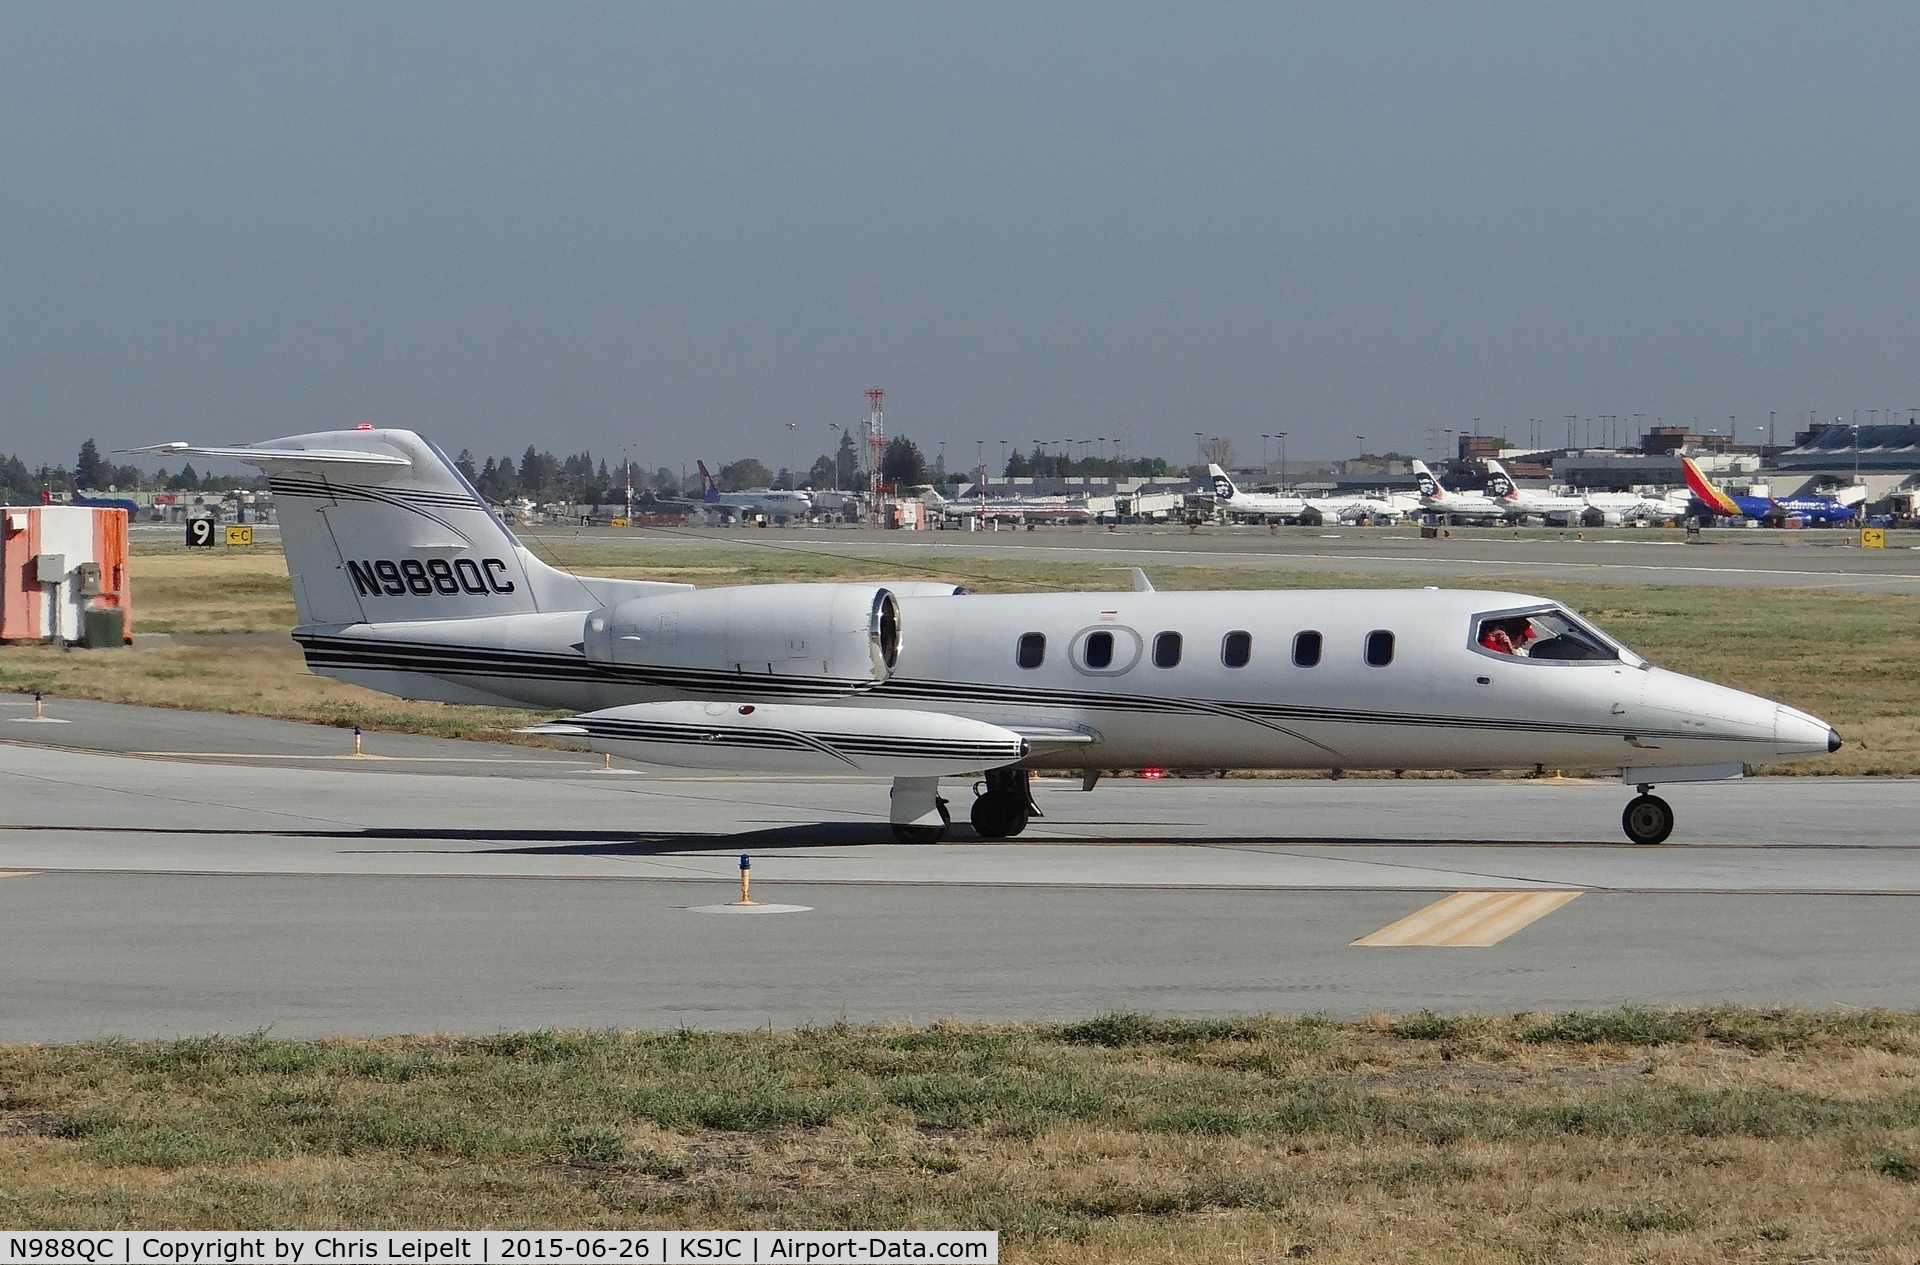 N988QC, 1981 Gates Learjet 35A C/N 455, A transient 1981 Learjet 35A (MED AIR LLC -WILMINGTON, DE) taxing out for departure at San Jose International Airport, CA.